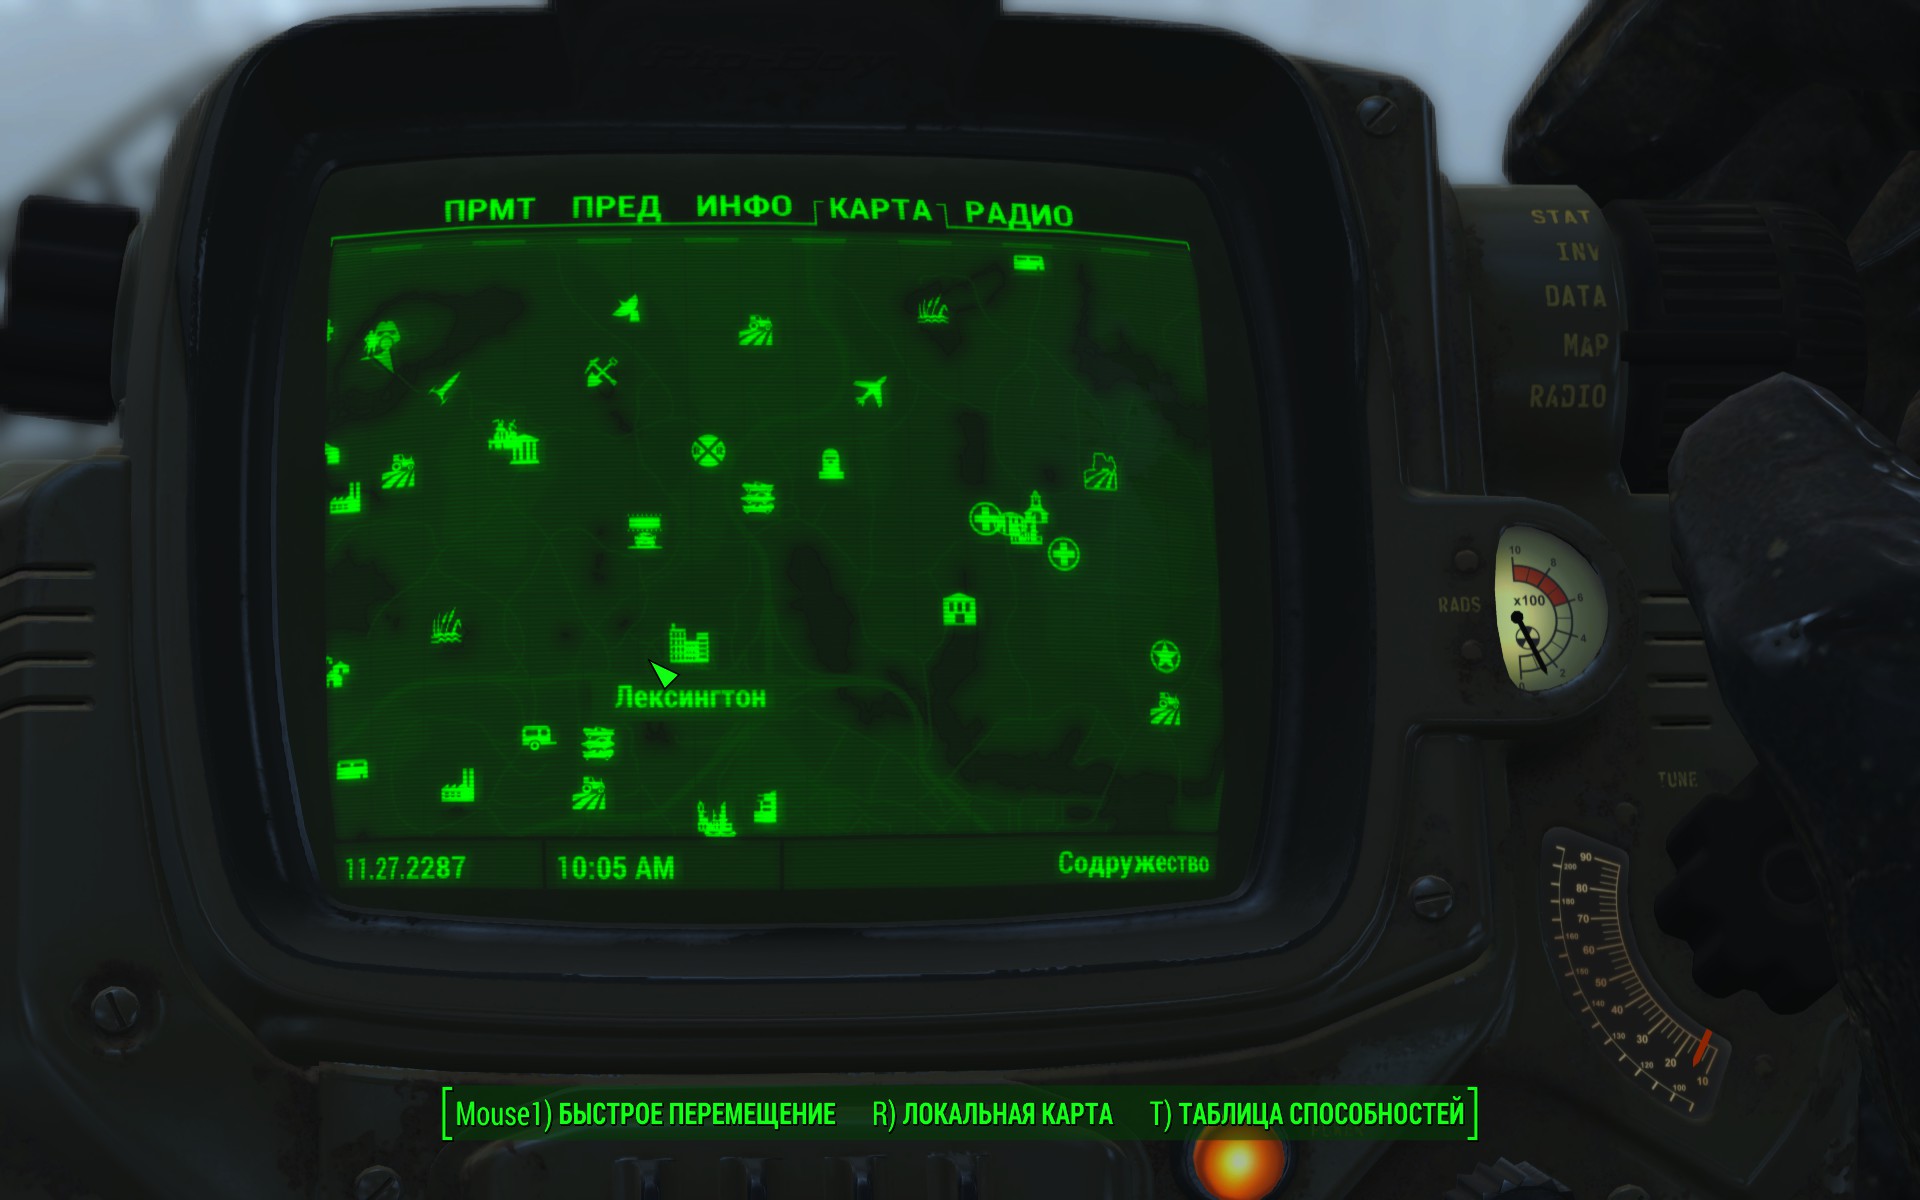 Fallout 4 for harbor wiki фото 107